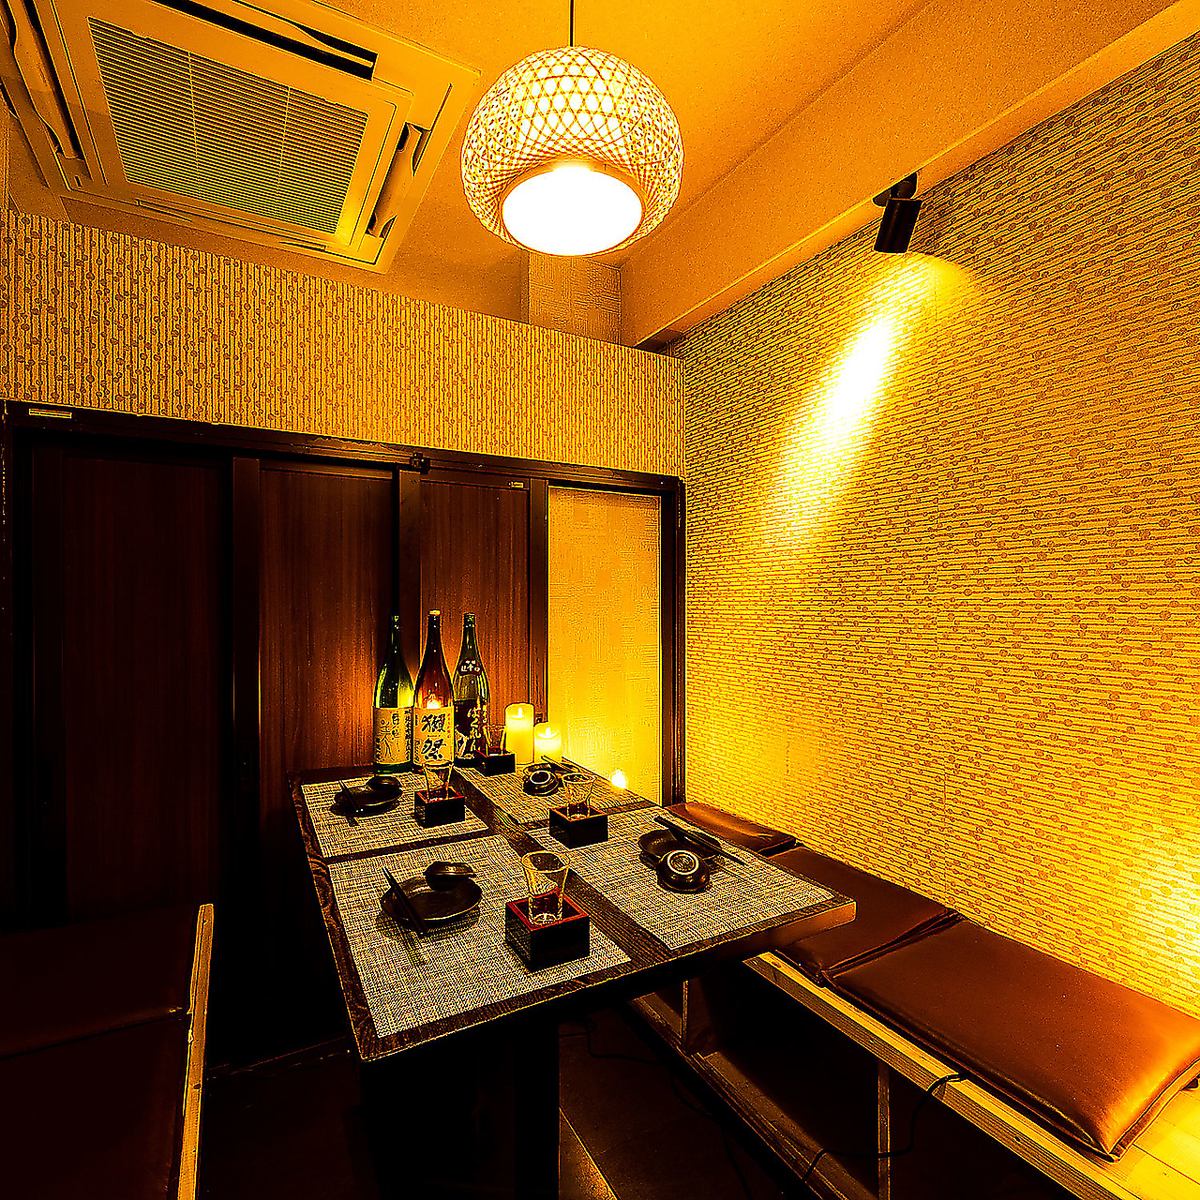 There is a stylish private completely private room ◎ Have a wonderful time together ☆